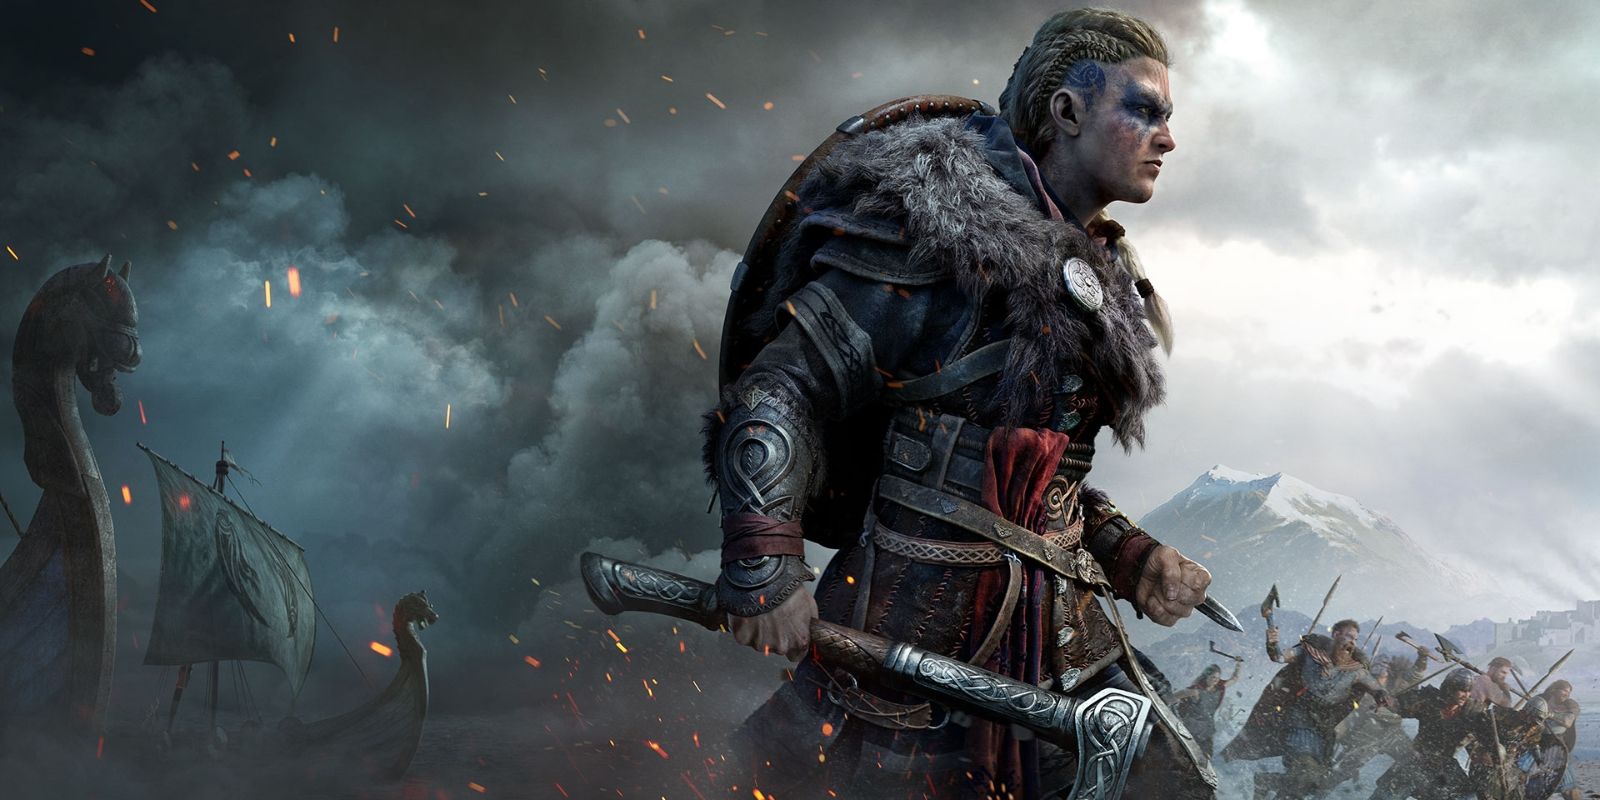 Eivor wielding an axe in promotional images for Assassin's Creed: Valhalla